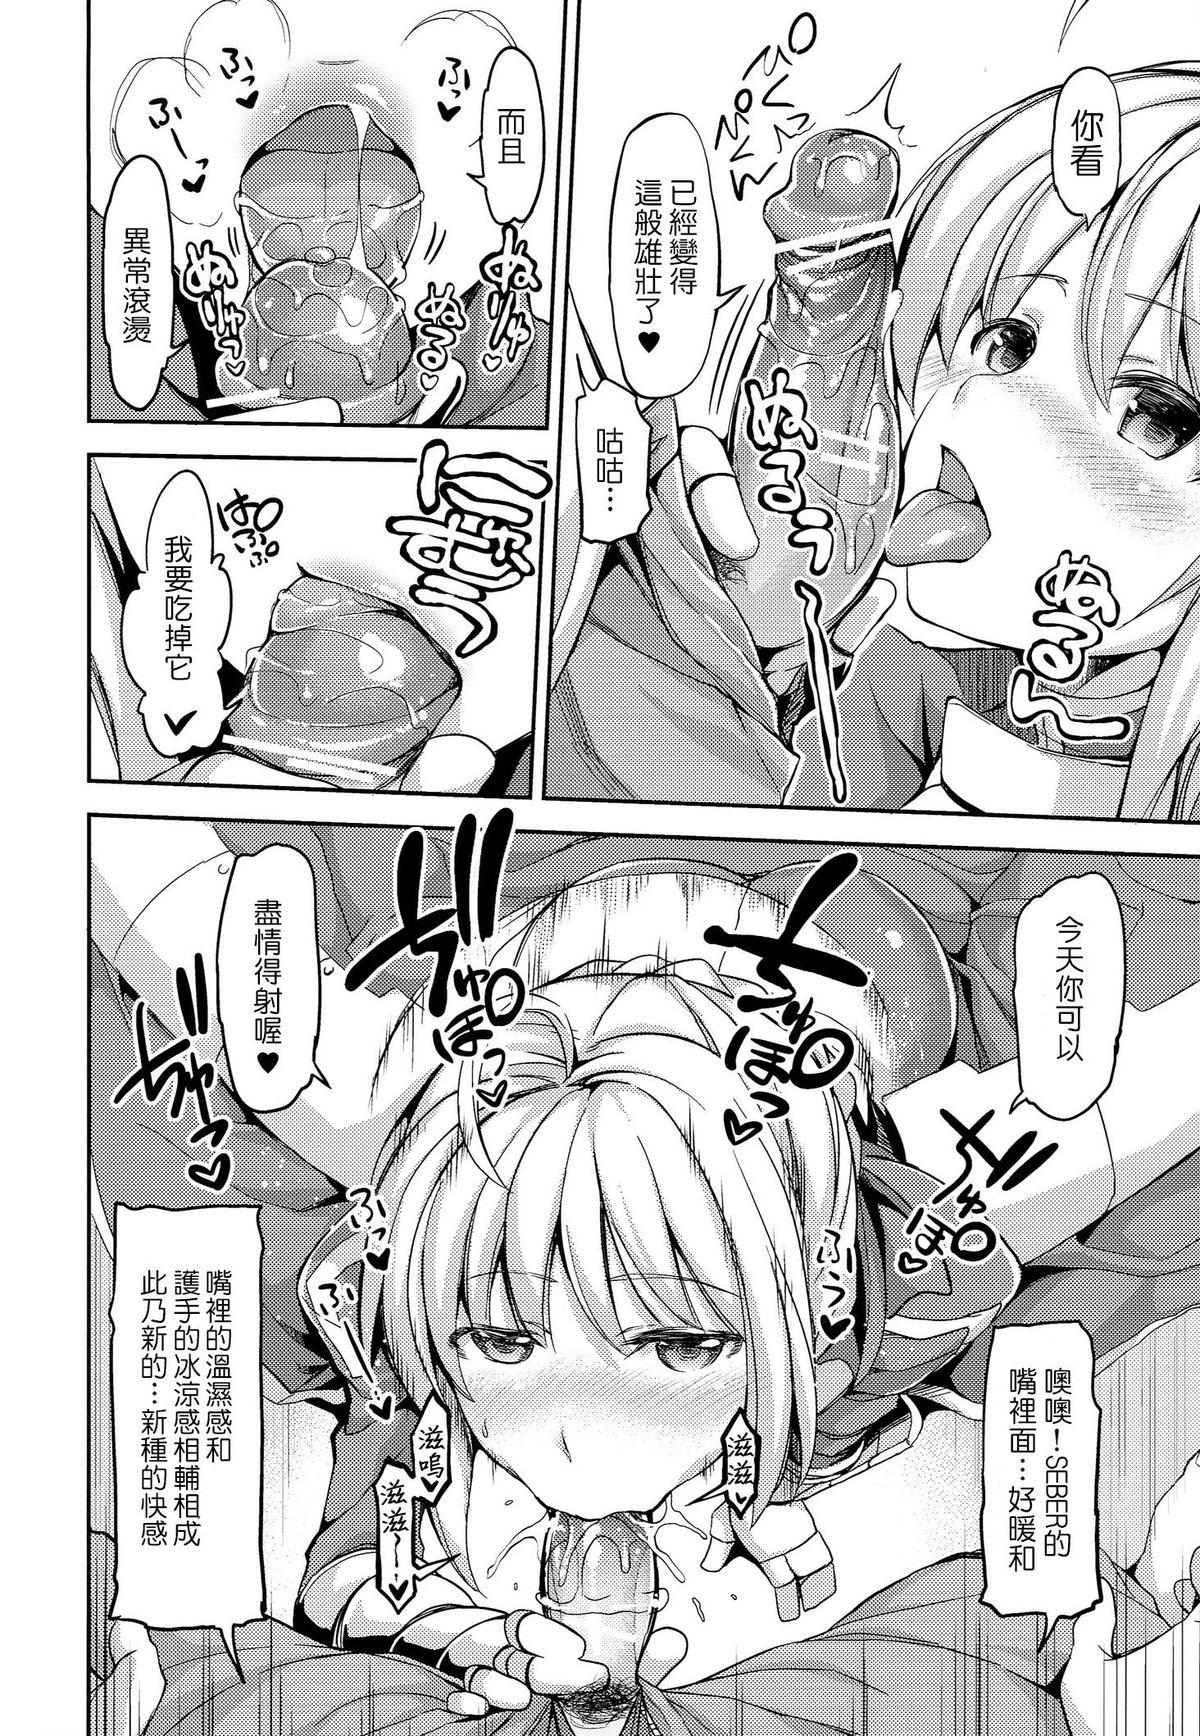 Porn Fate delihell night - Fate stay night Desi - Page 7